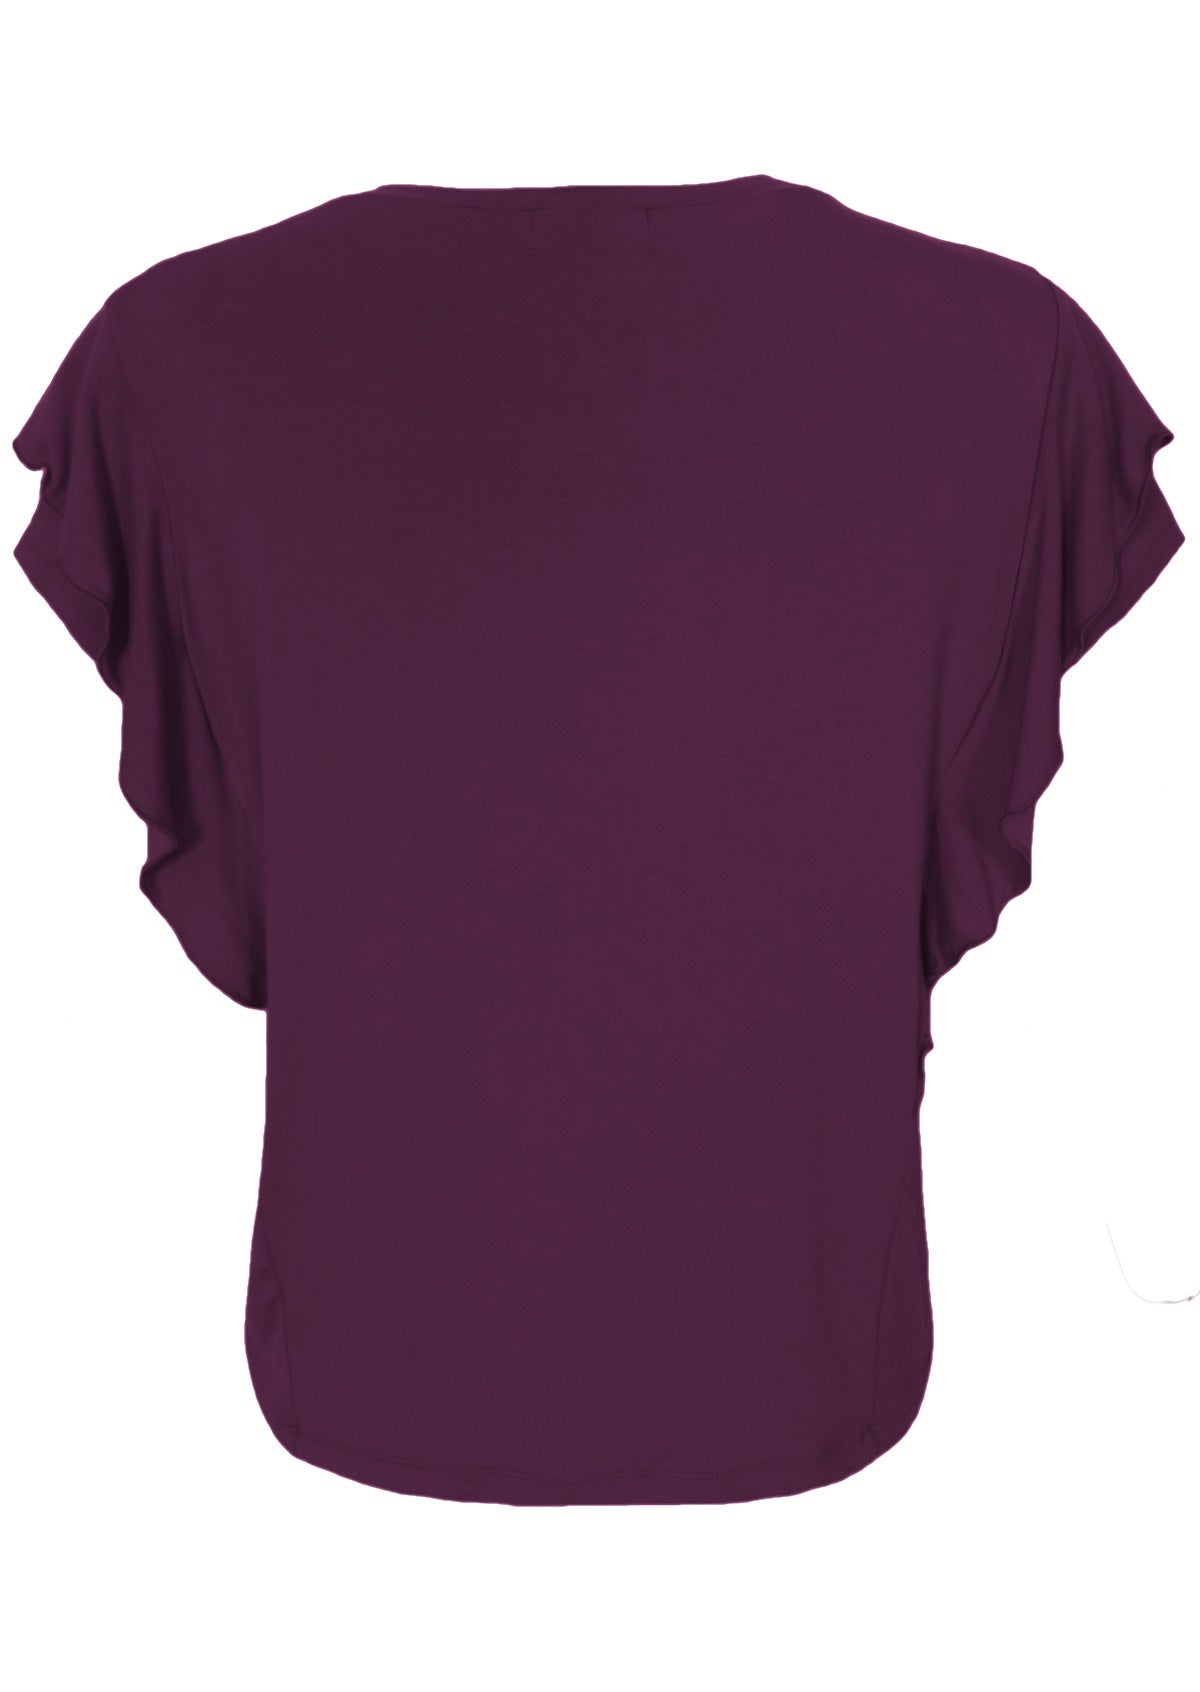 Back view loose fit women's purple rayon top.